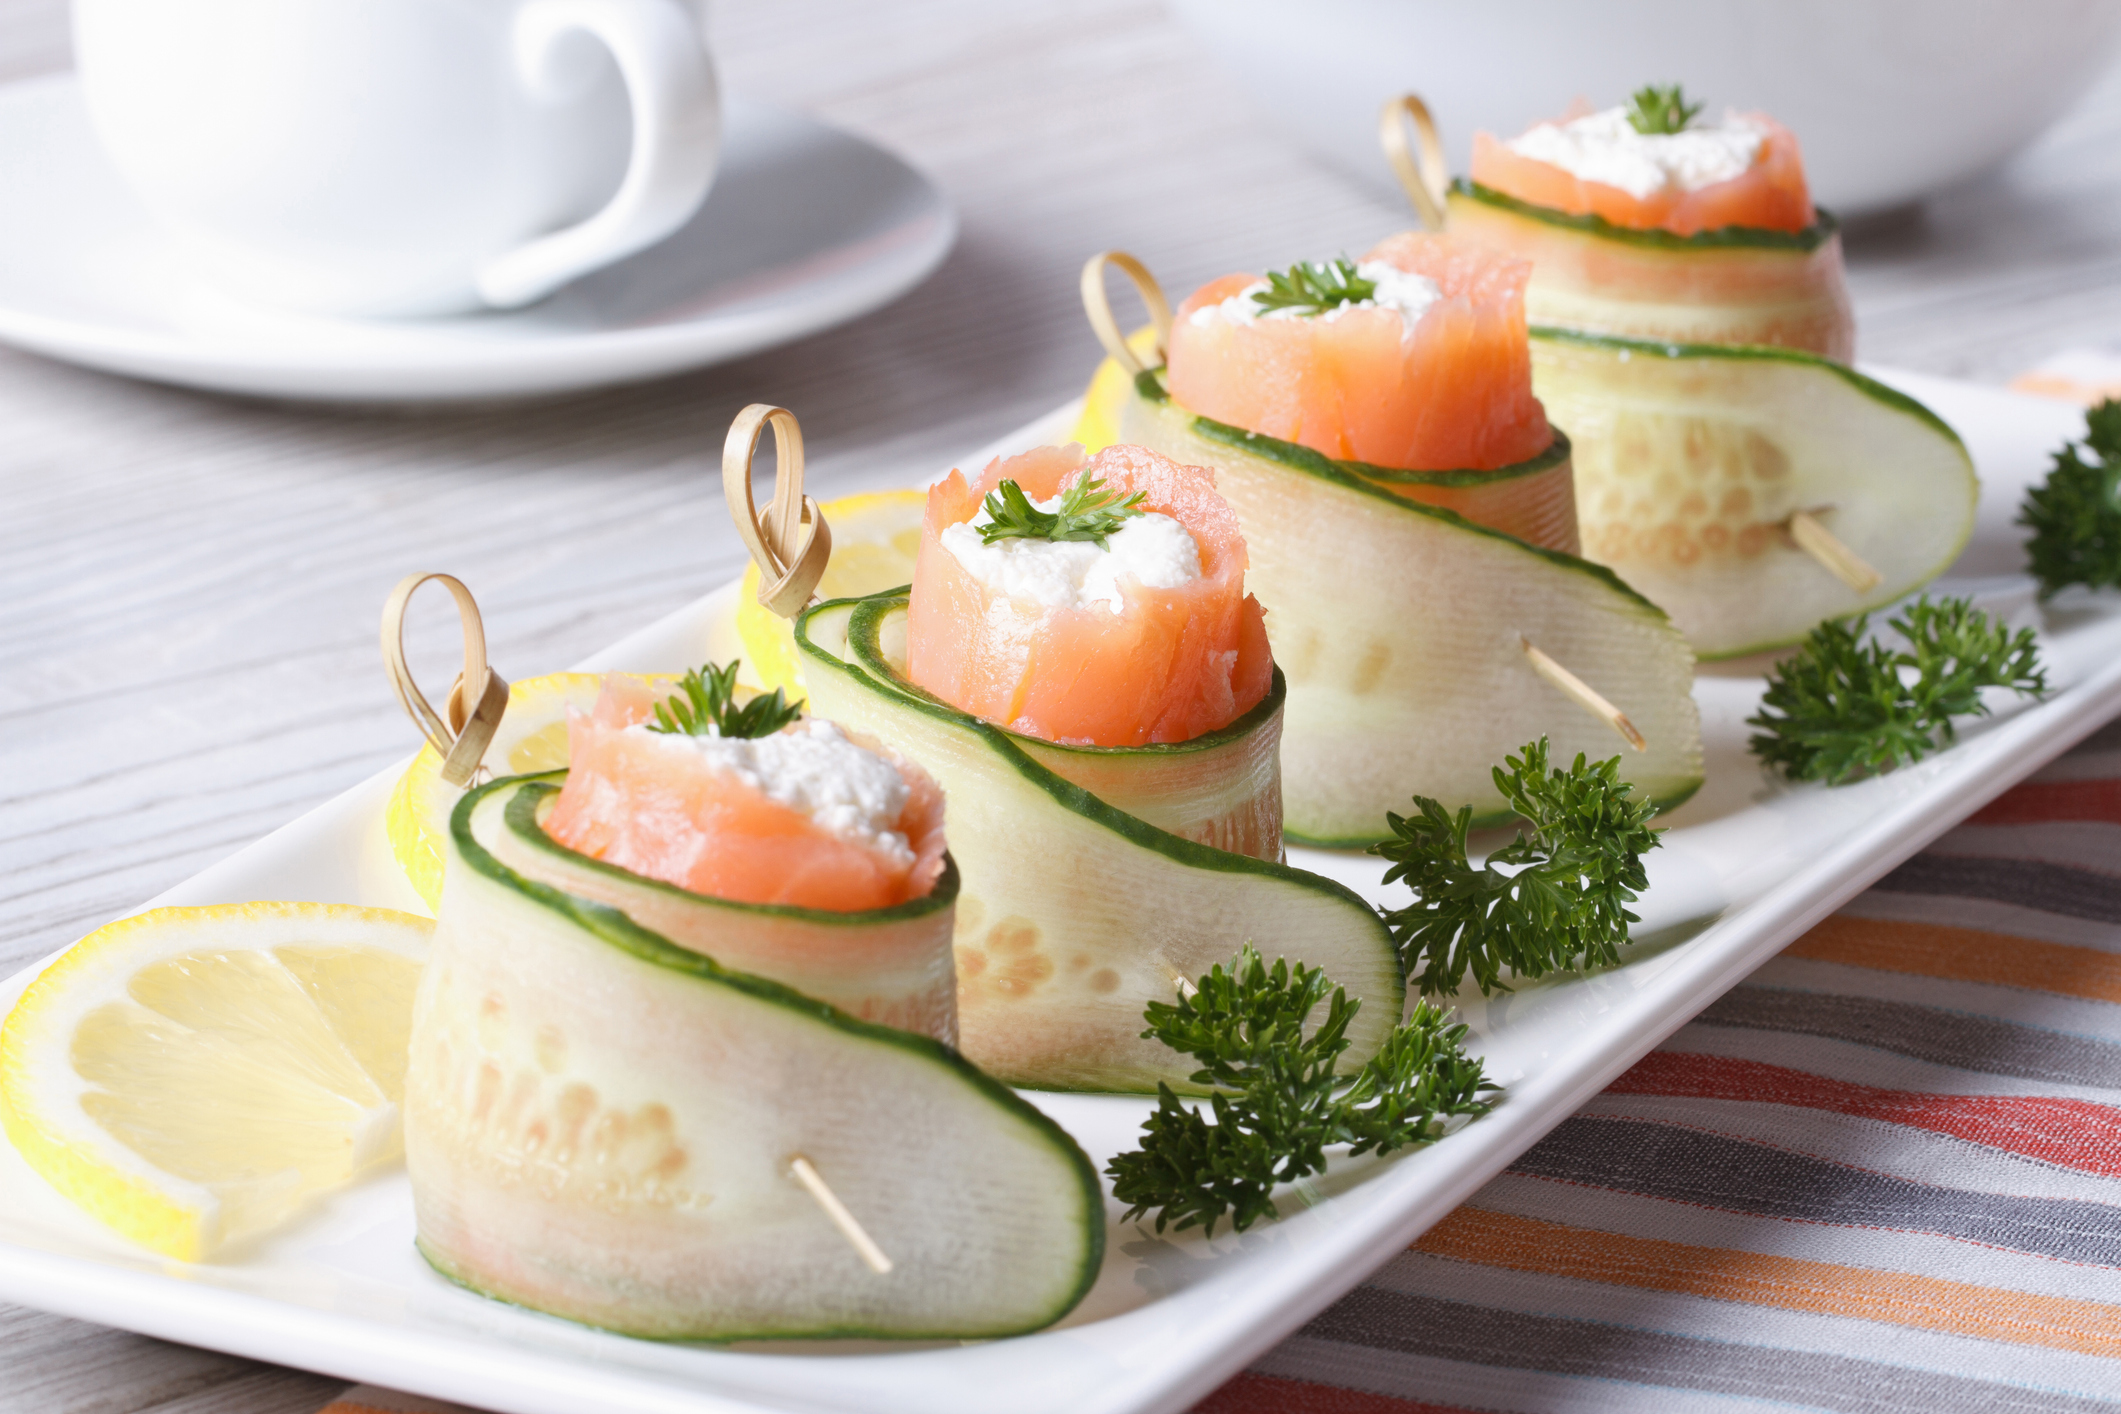 Getty Images - Salmon Starter